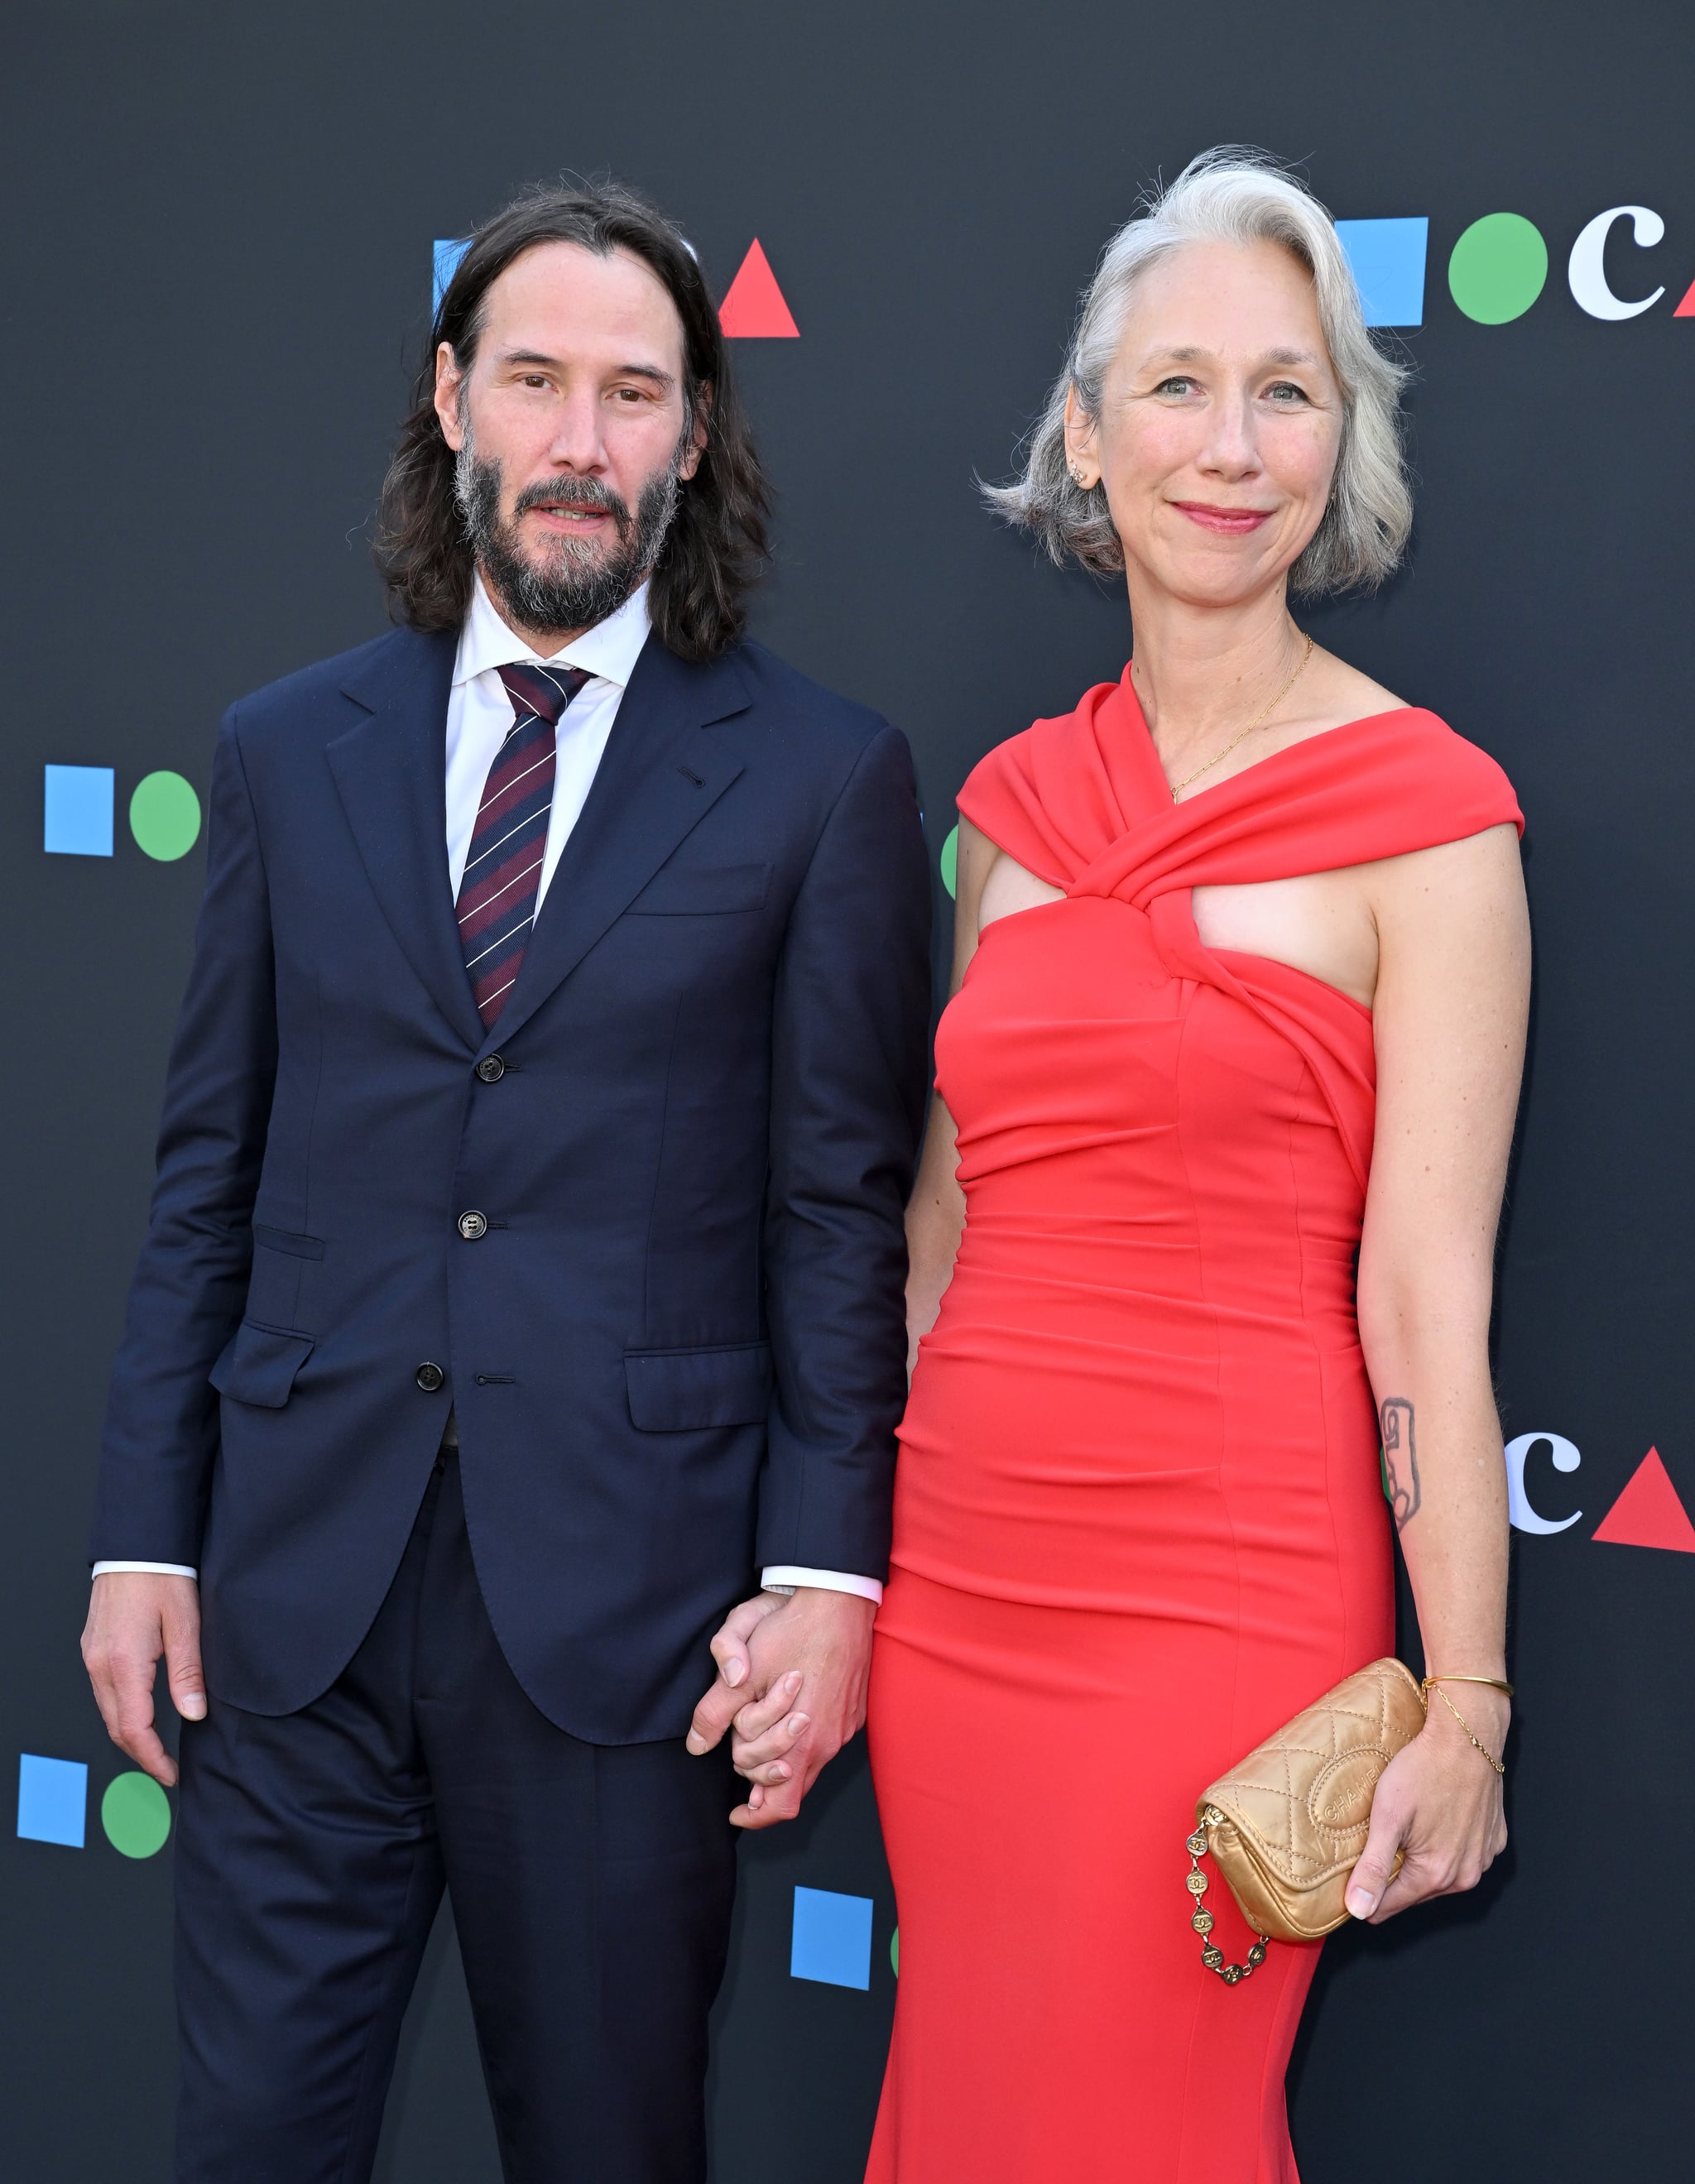 LOS ANGELES, CALIFORNIA - JUNE 04: Keanu Reeves and Alexandra Grant attend the MOCA Gala 2022 at The Geffen Contemporary at MOCA on June 04, 2022 in Los Angeles, California. (Photo by Axelle/Bauer-Griffin/FilmMagic)